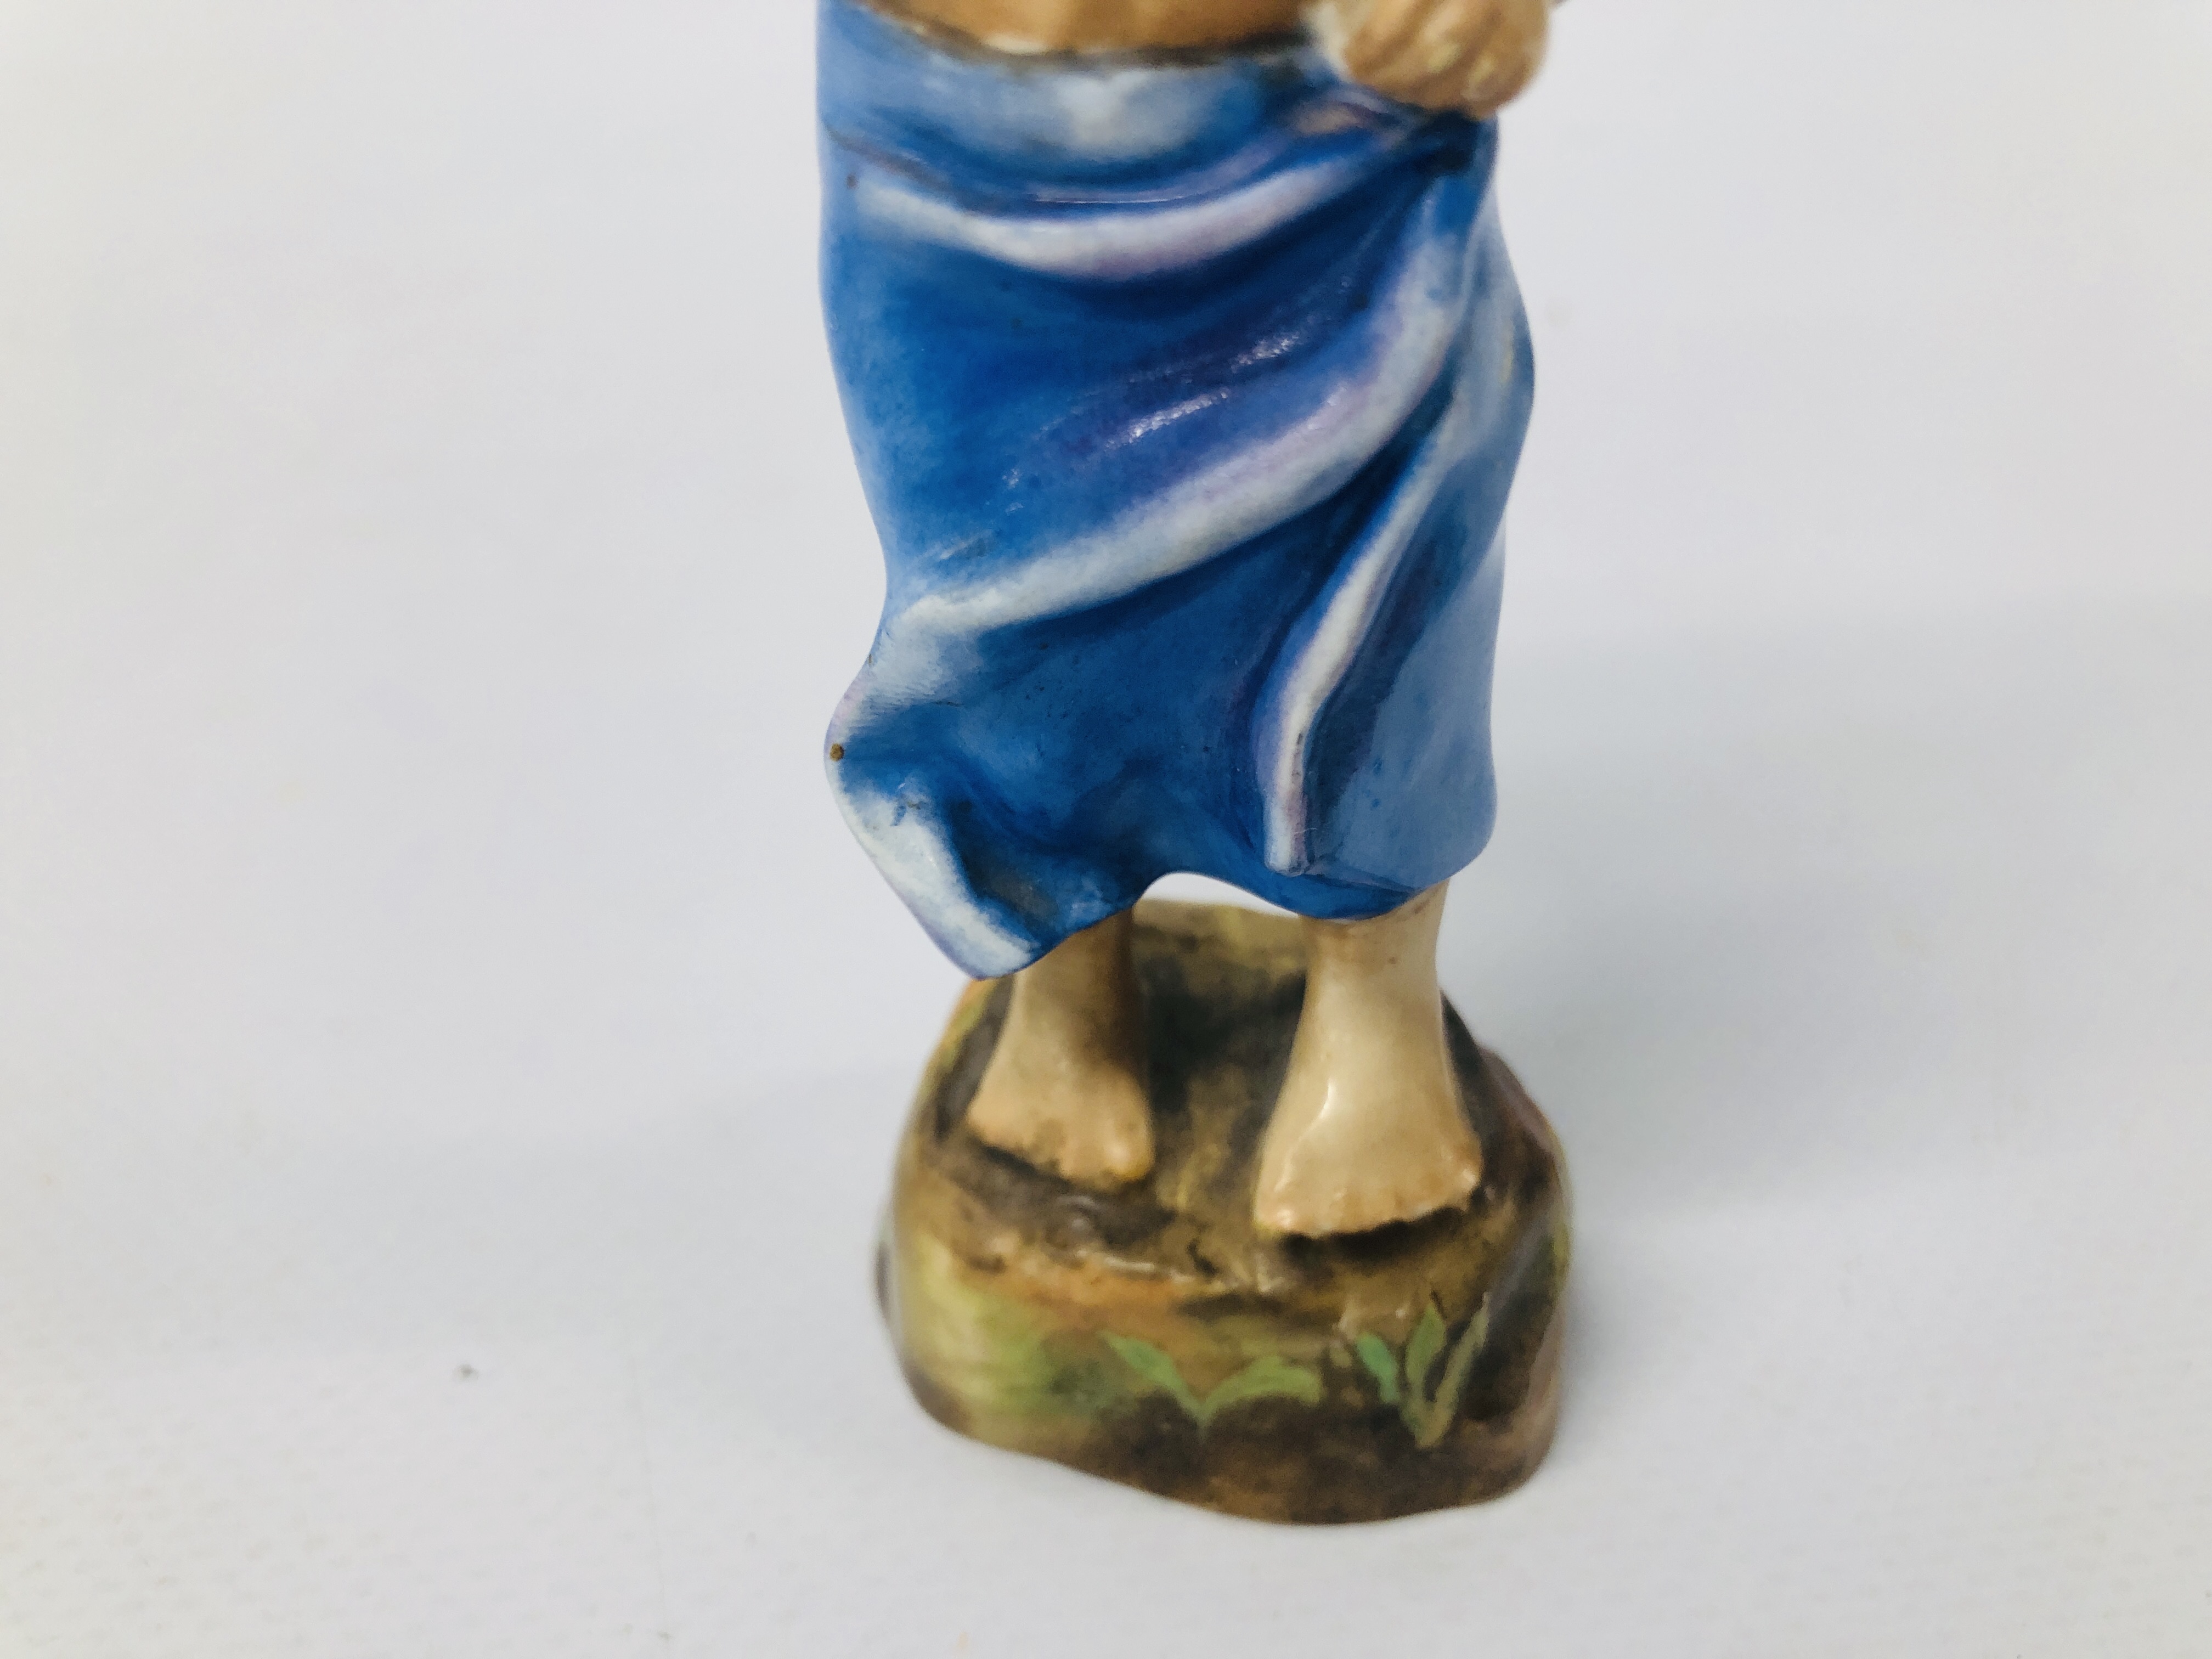 A ROYAL WORCESTER FIGURE "BURMAH 3068" BY F. DOUGHTY, H 12CM. - Image 4 of 10